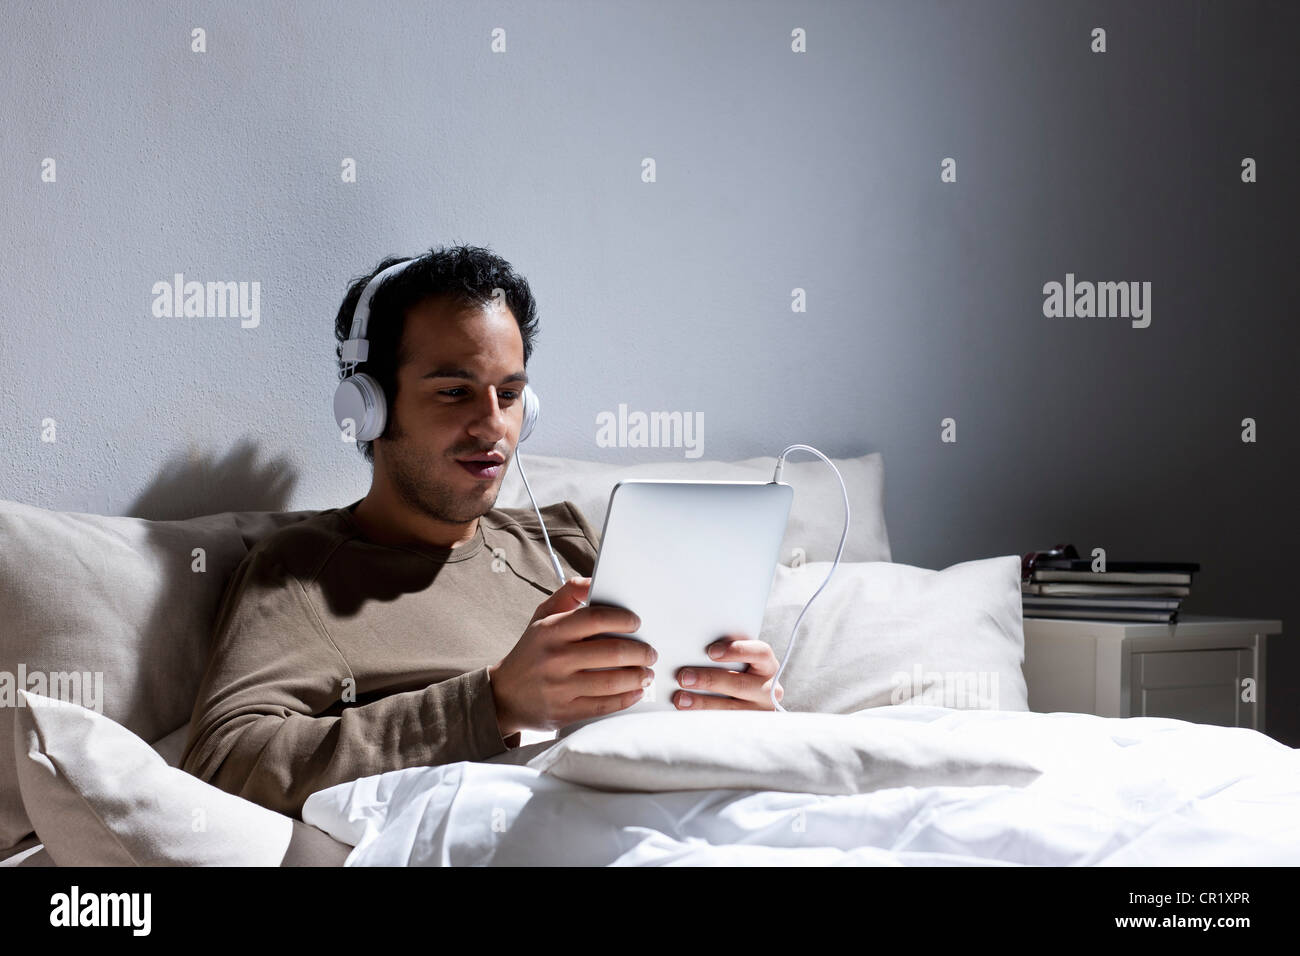 Man using tablet computer in bed Stock Photo